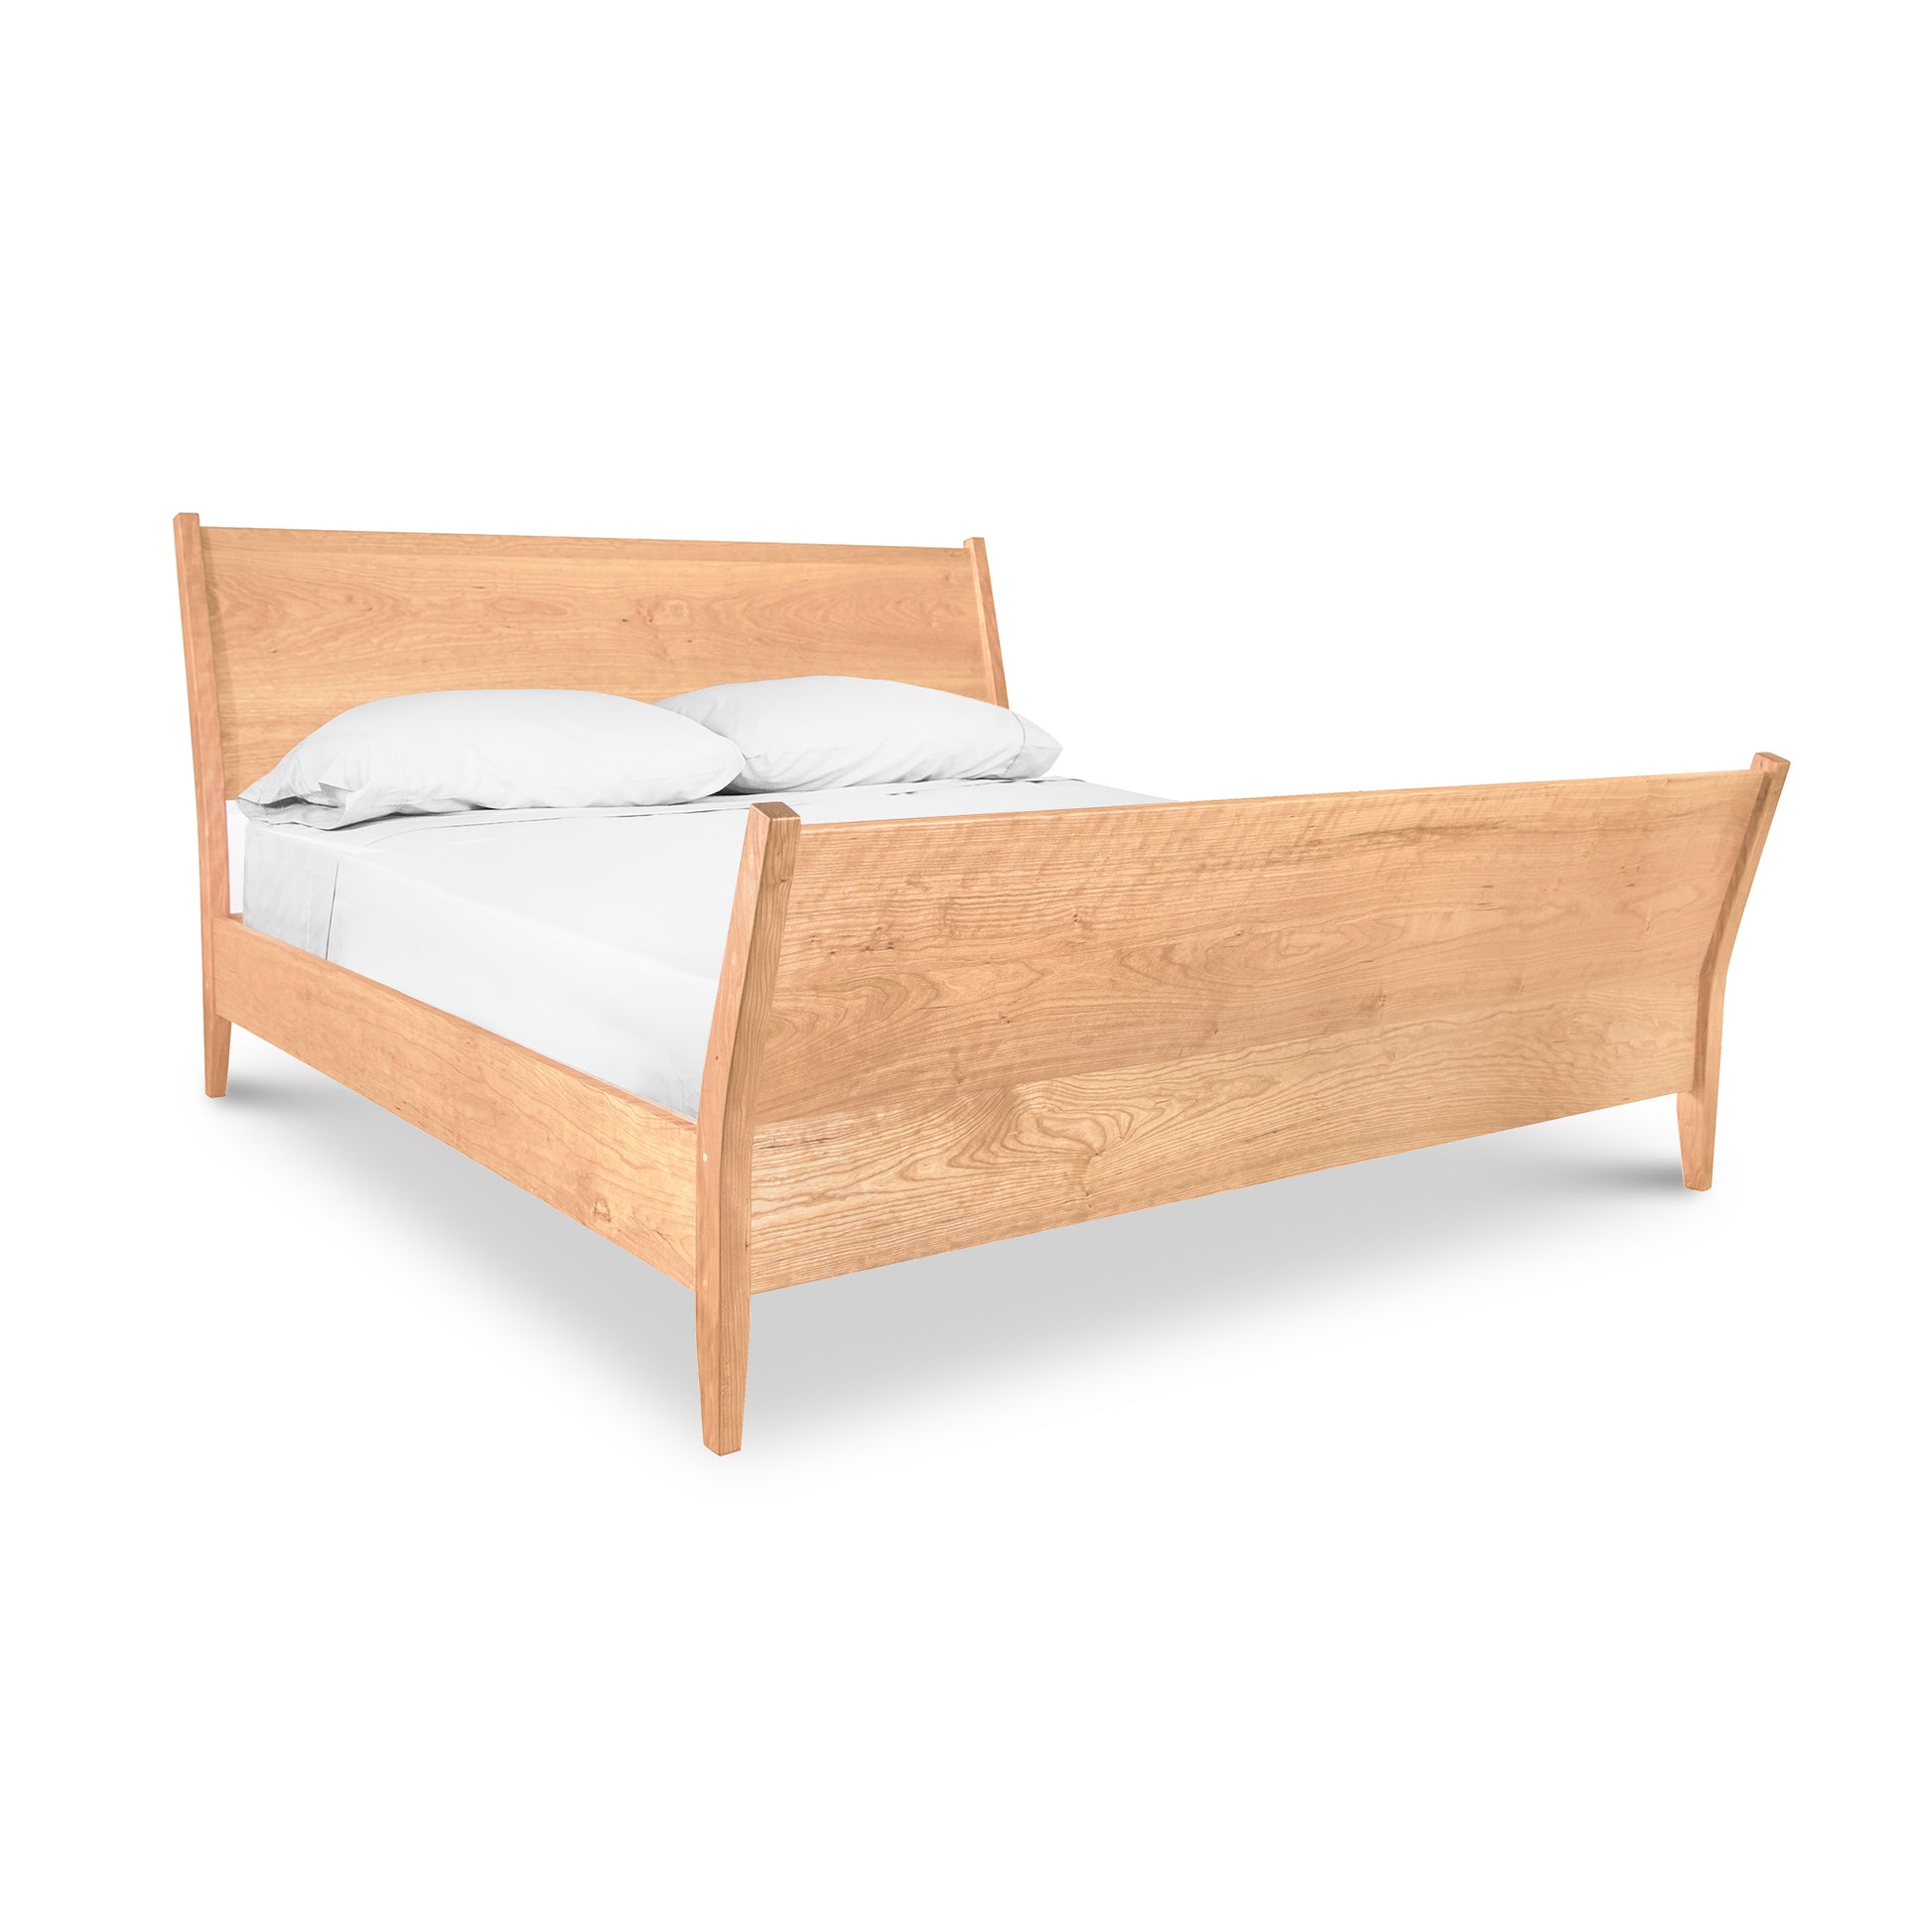 A minimalist wooden bed frame with a high headboard and a lower footboard, both with a gently curved top edge, characterizing the Maple Corner Woodworks Andover Modern Incline Sleigh Bed. The bed is made